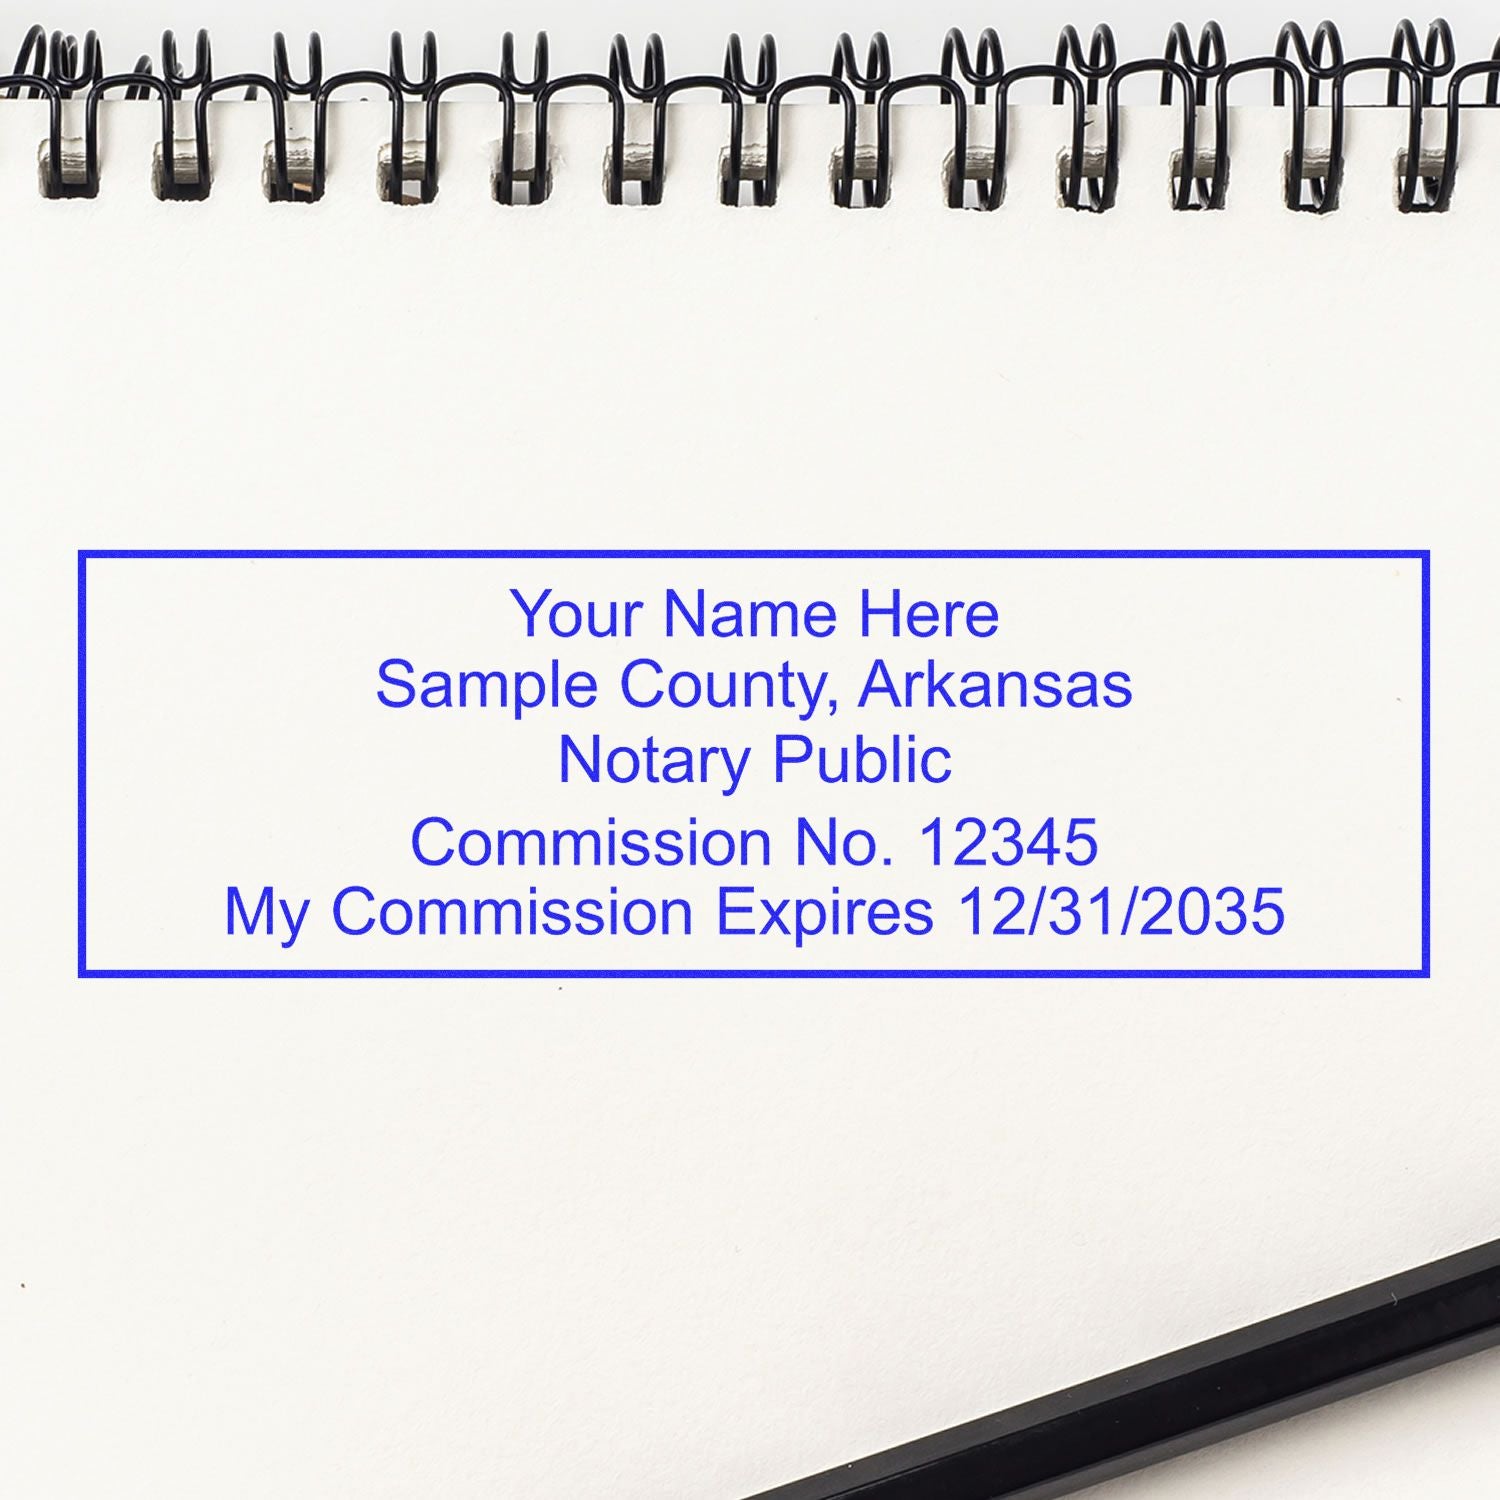 Arkansas Notary Stamp Selection Made Easy: Your Go-To Guide Feature Image